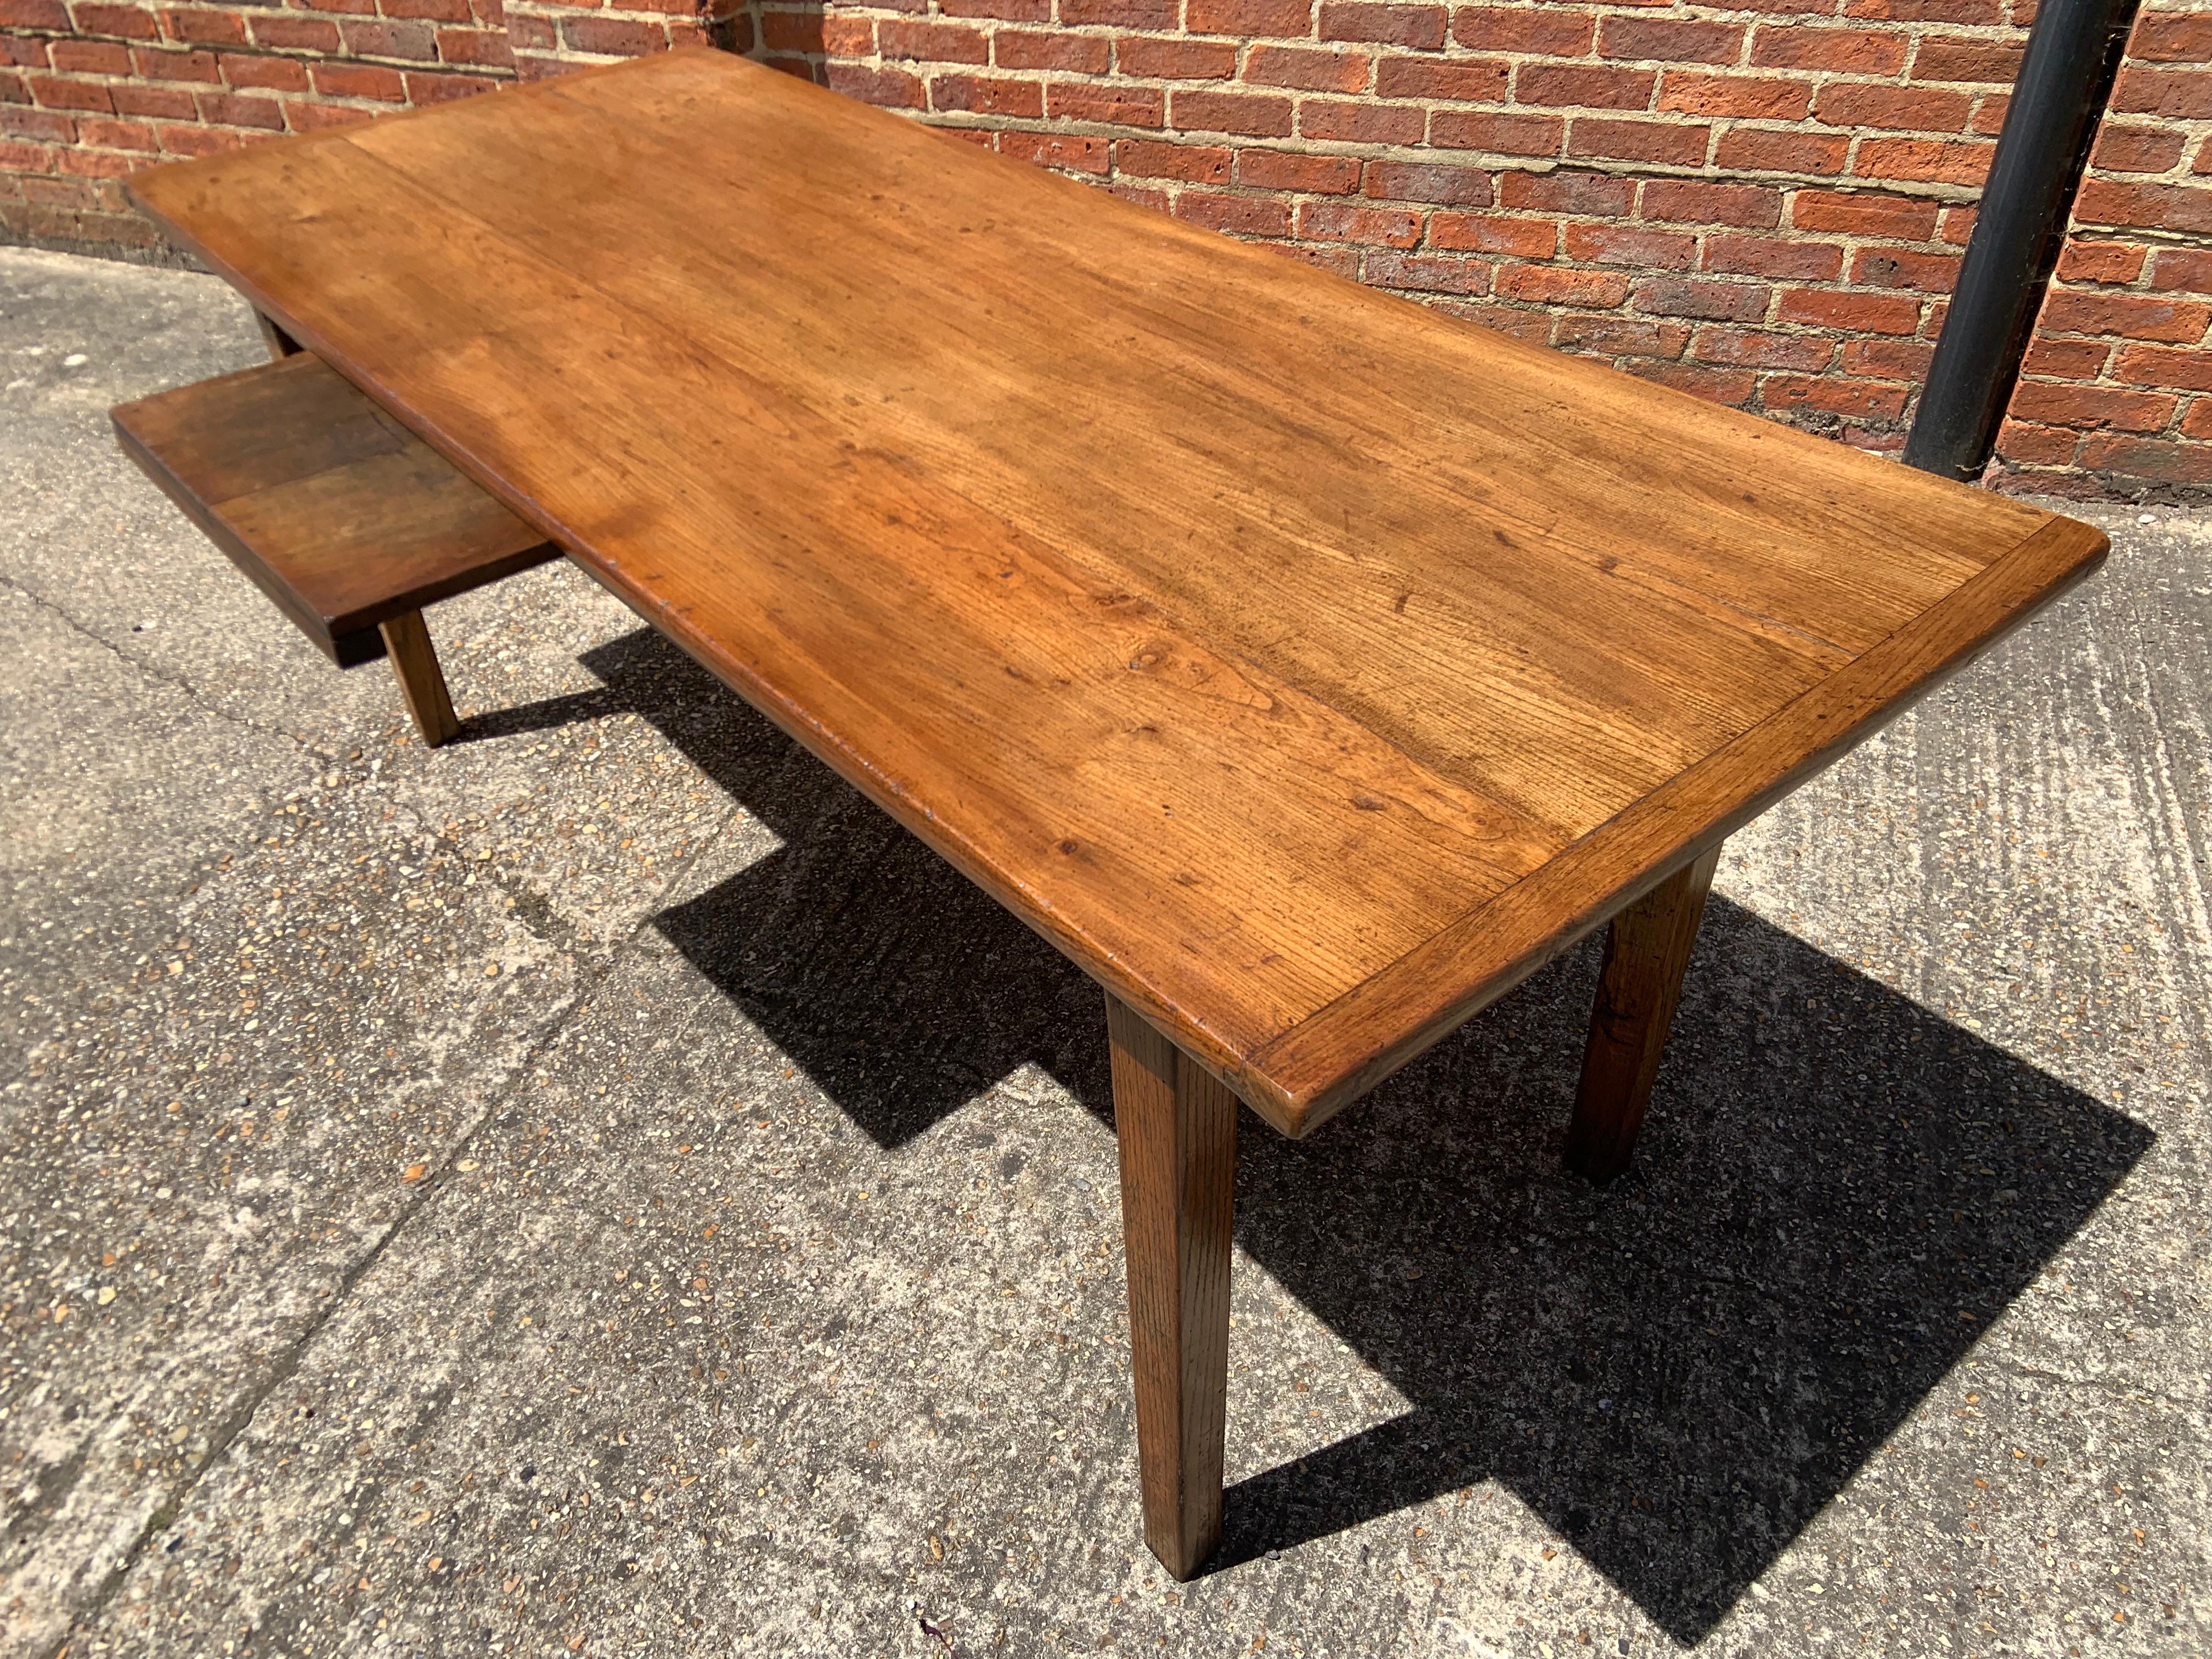 Antique Cherry Tapered Leg Dining Table with lovely wide top and cleated ends. The table has one good size drawer on one end. The patina to the top of the table is a mellow cherry with original colour and patina, which would fit well in a number of